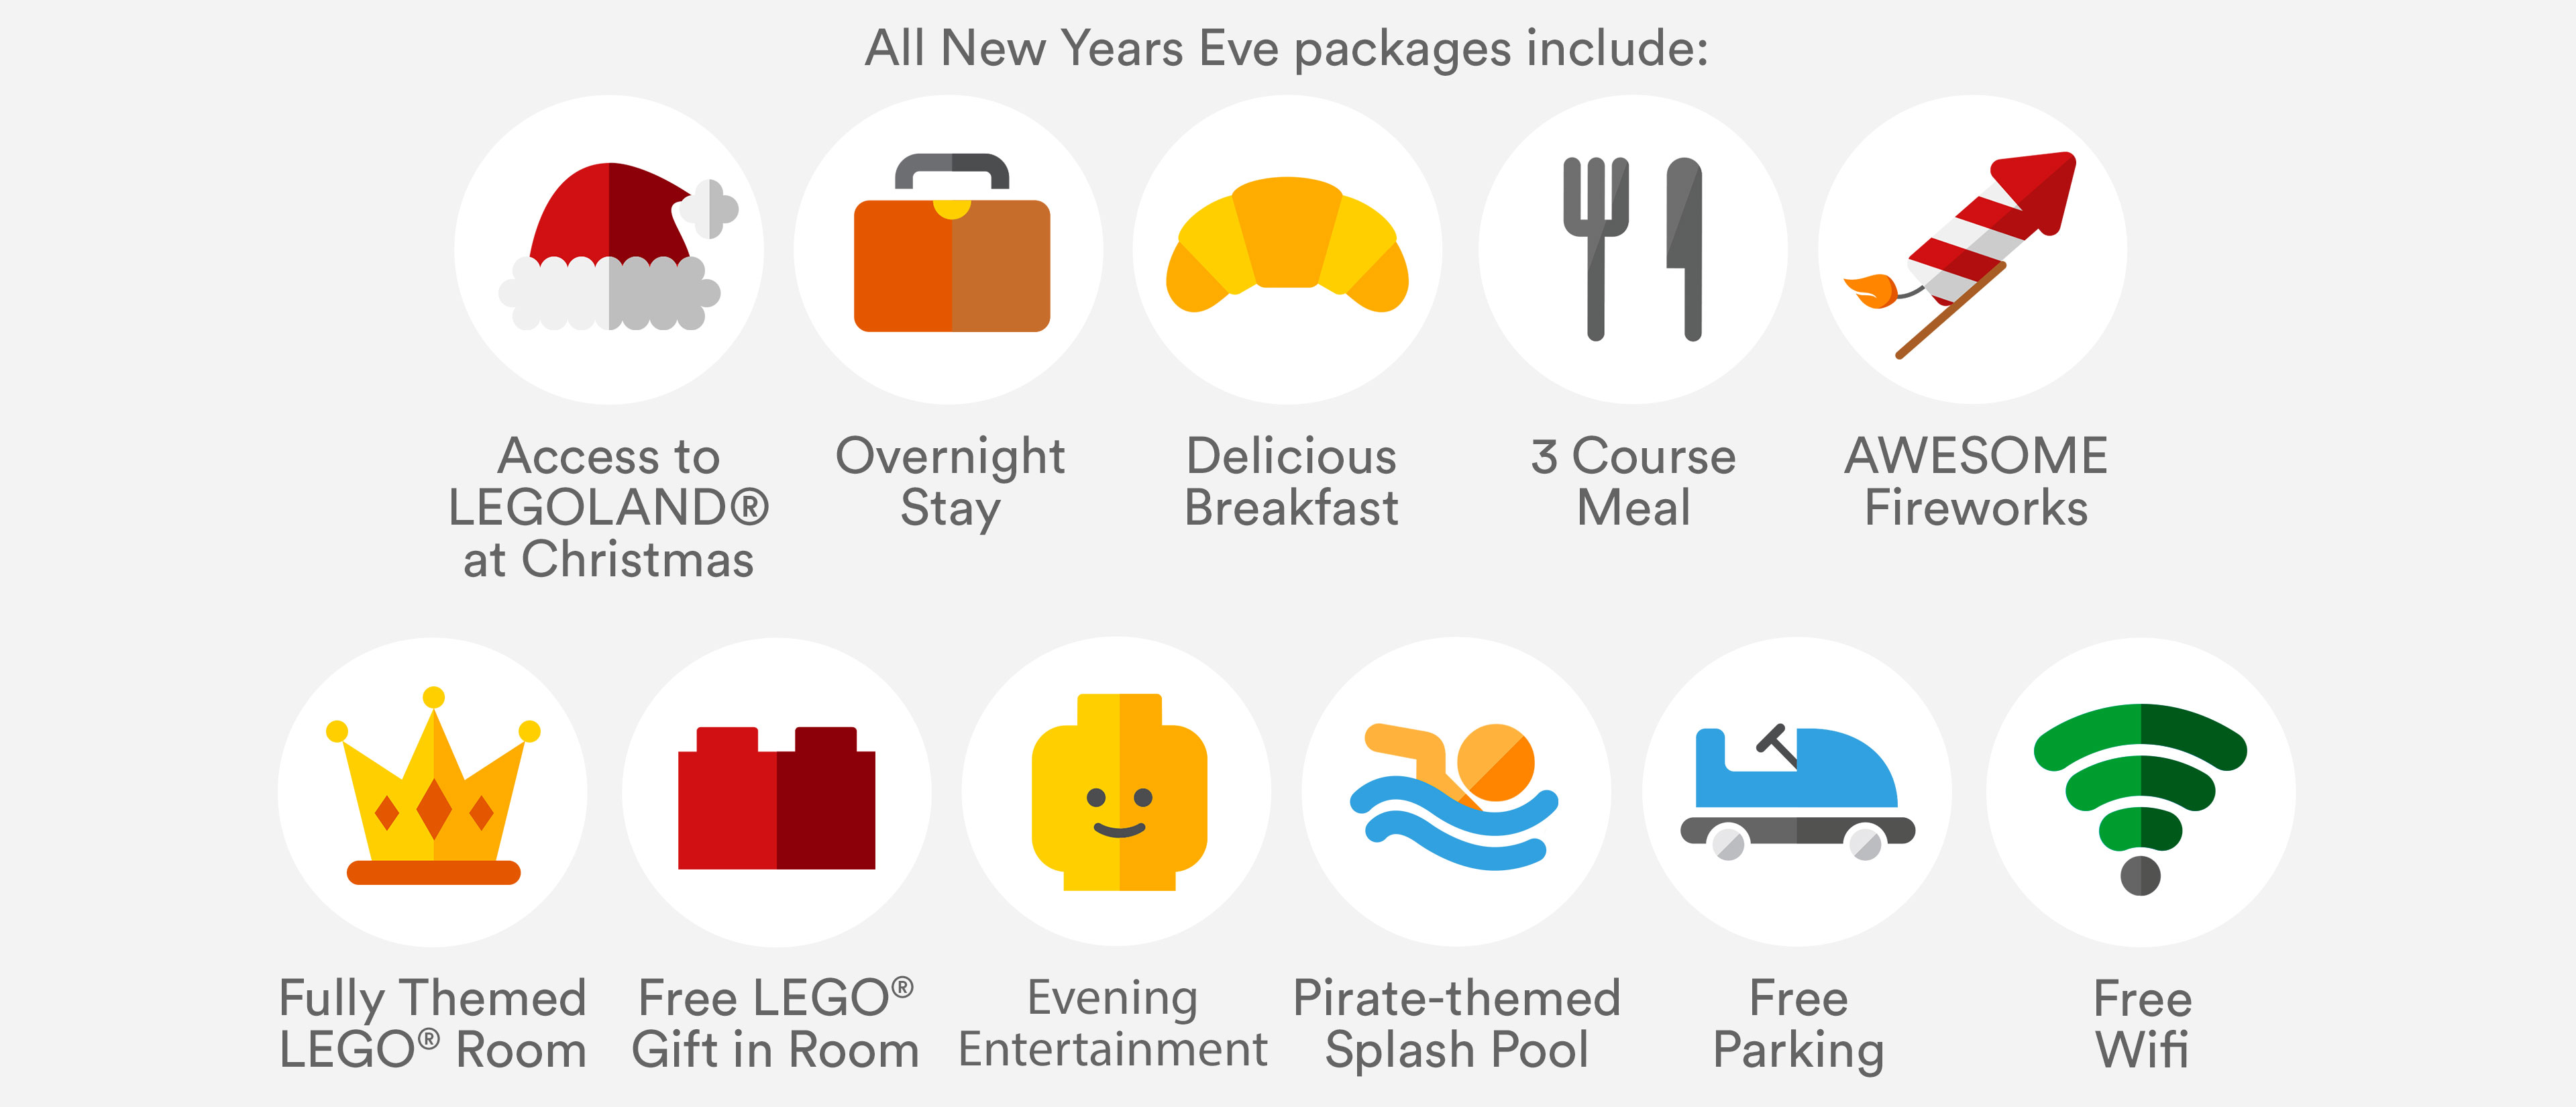 LEGOLAND Holidays packages include: 1-day theme park entry, one night stay, breakfast, 3-course meal, awesome fireworks, free LEGO gift, evening entertainment, pirate themed splash pool, free parking, free WiFi